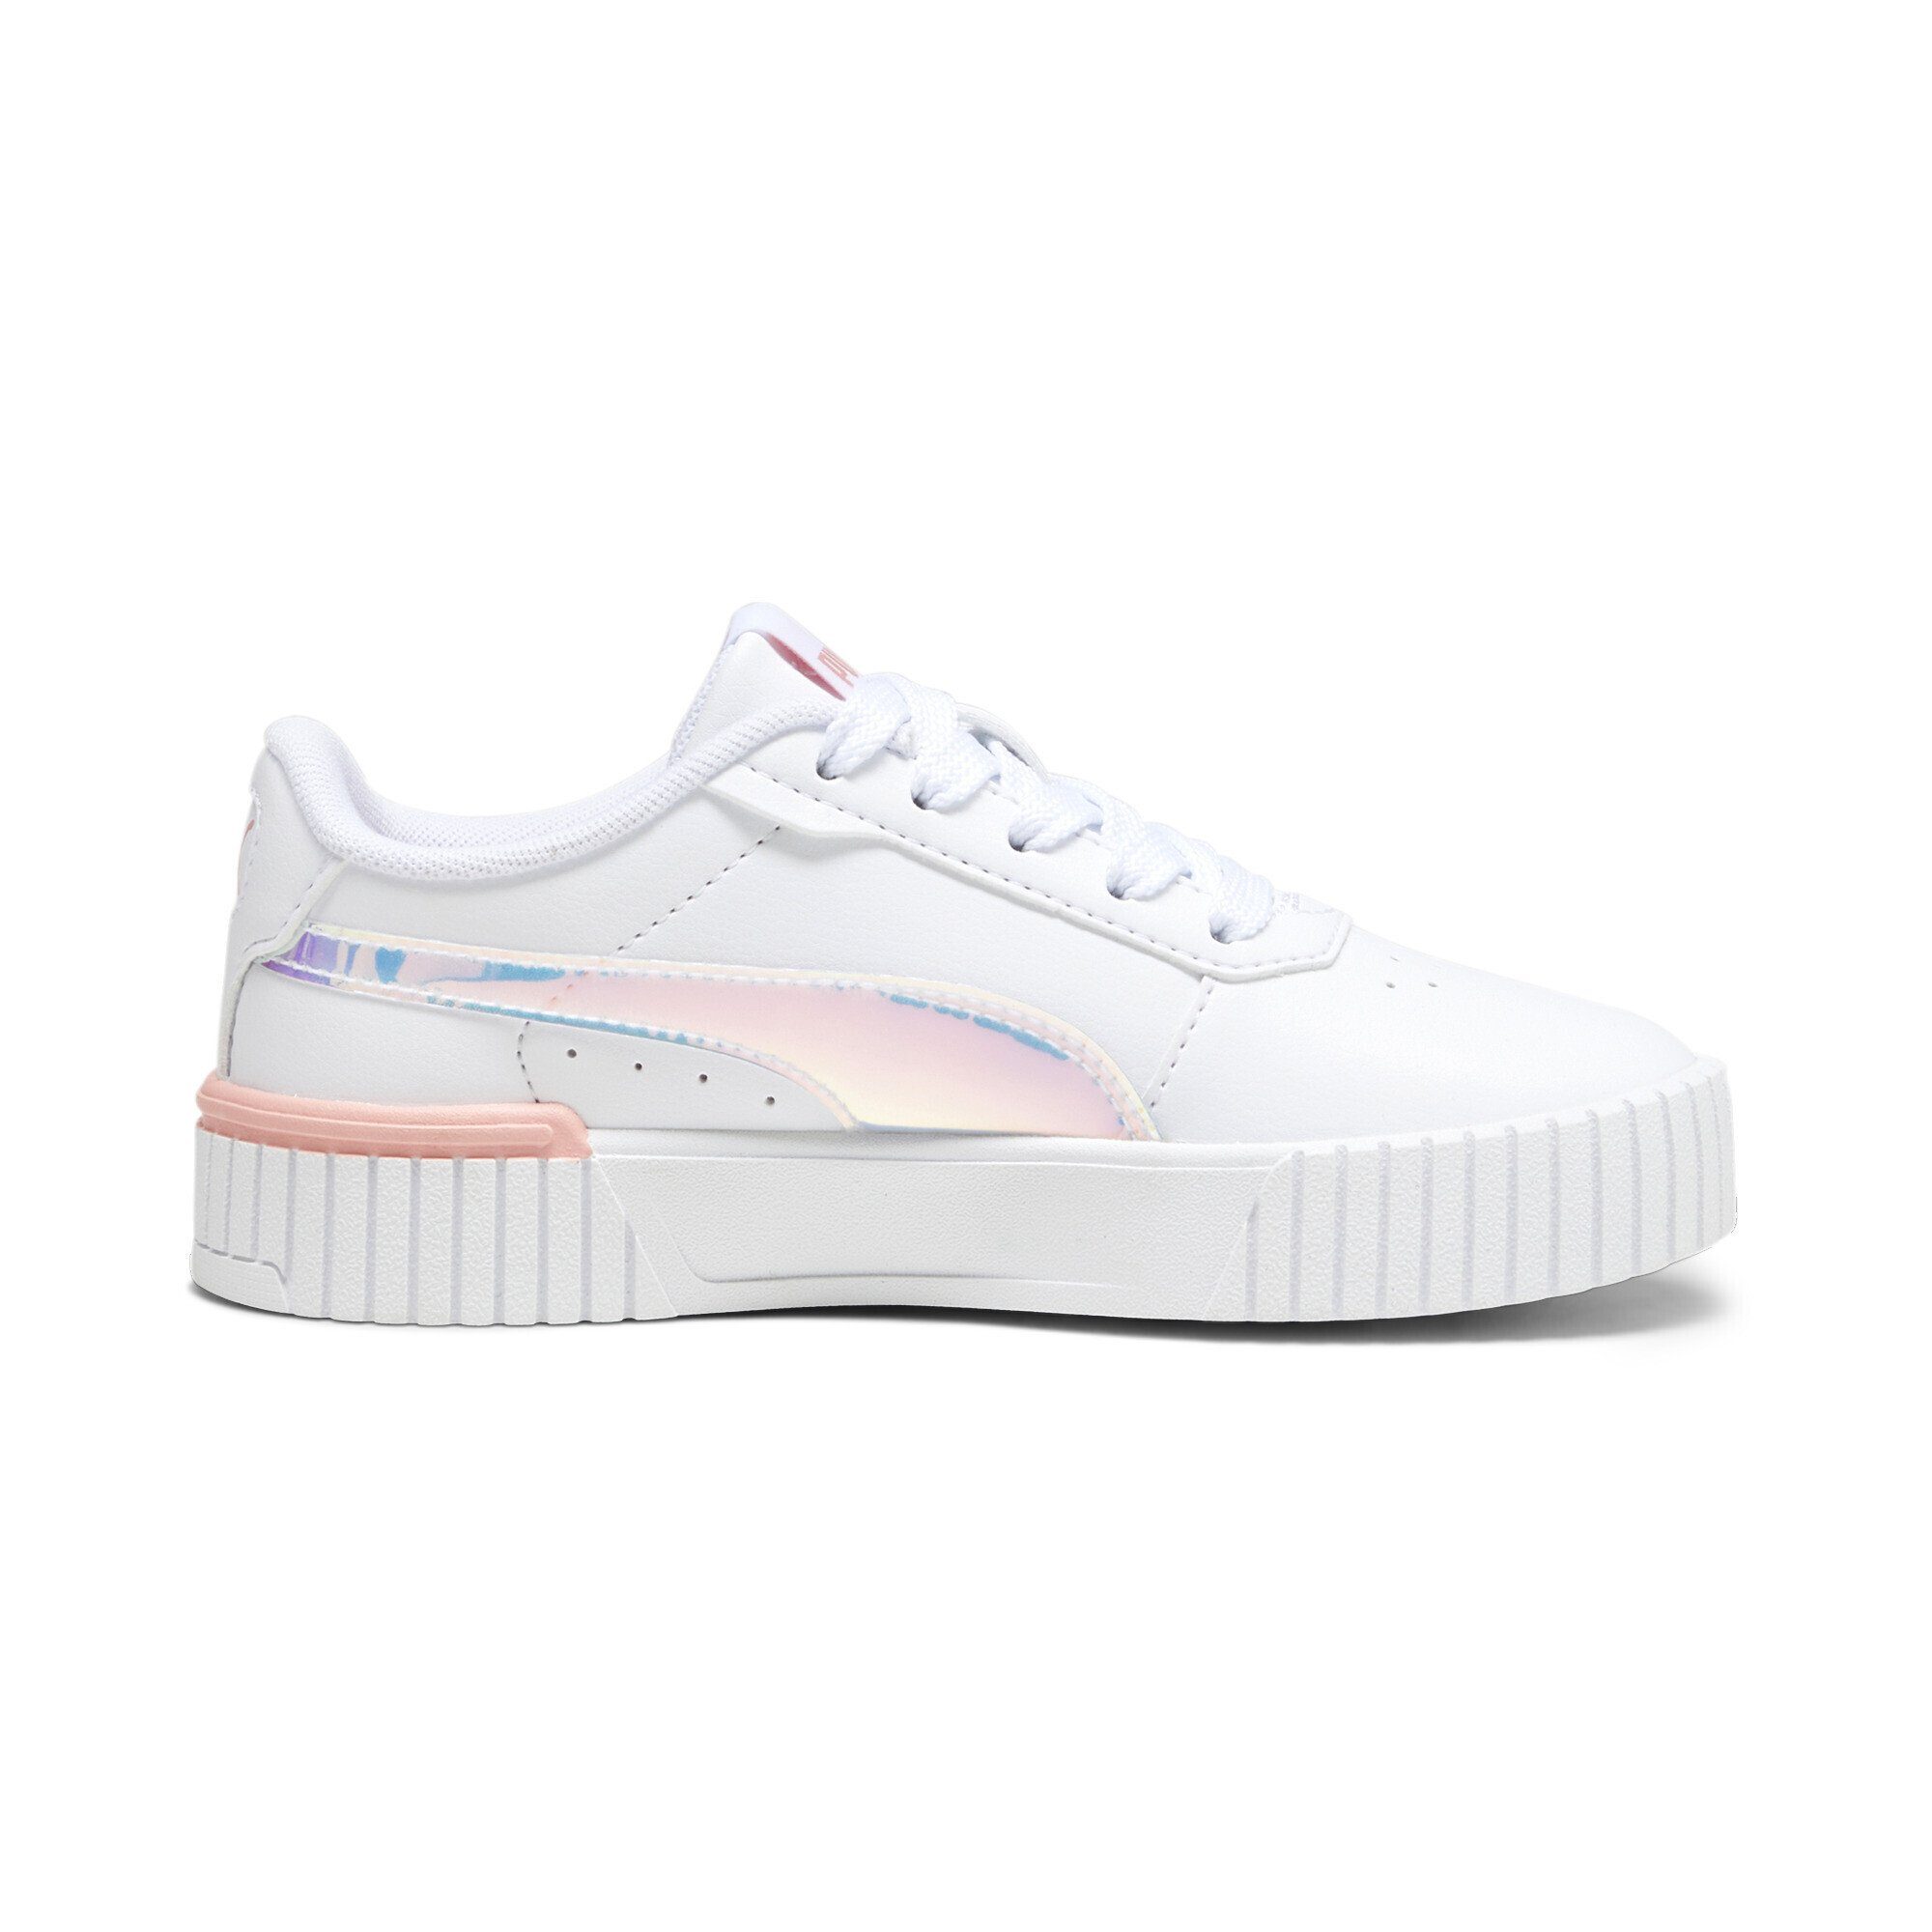 Sneaker PUMA Carina Wings 2.0 Crystal Sneakers Mädchen